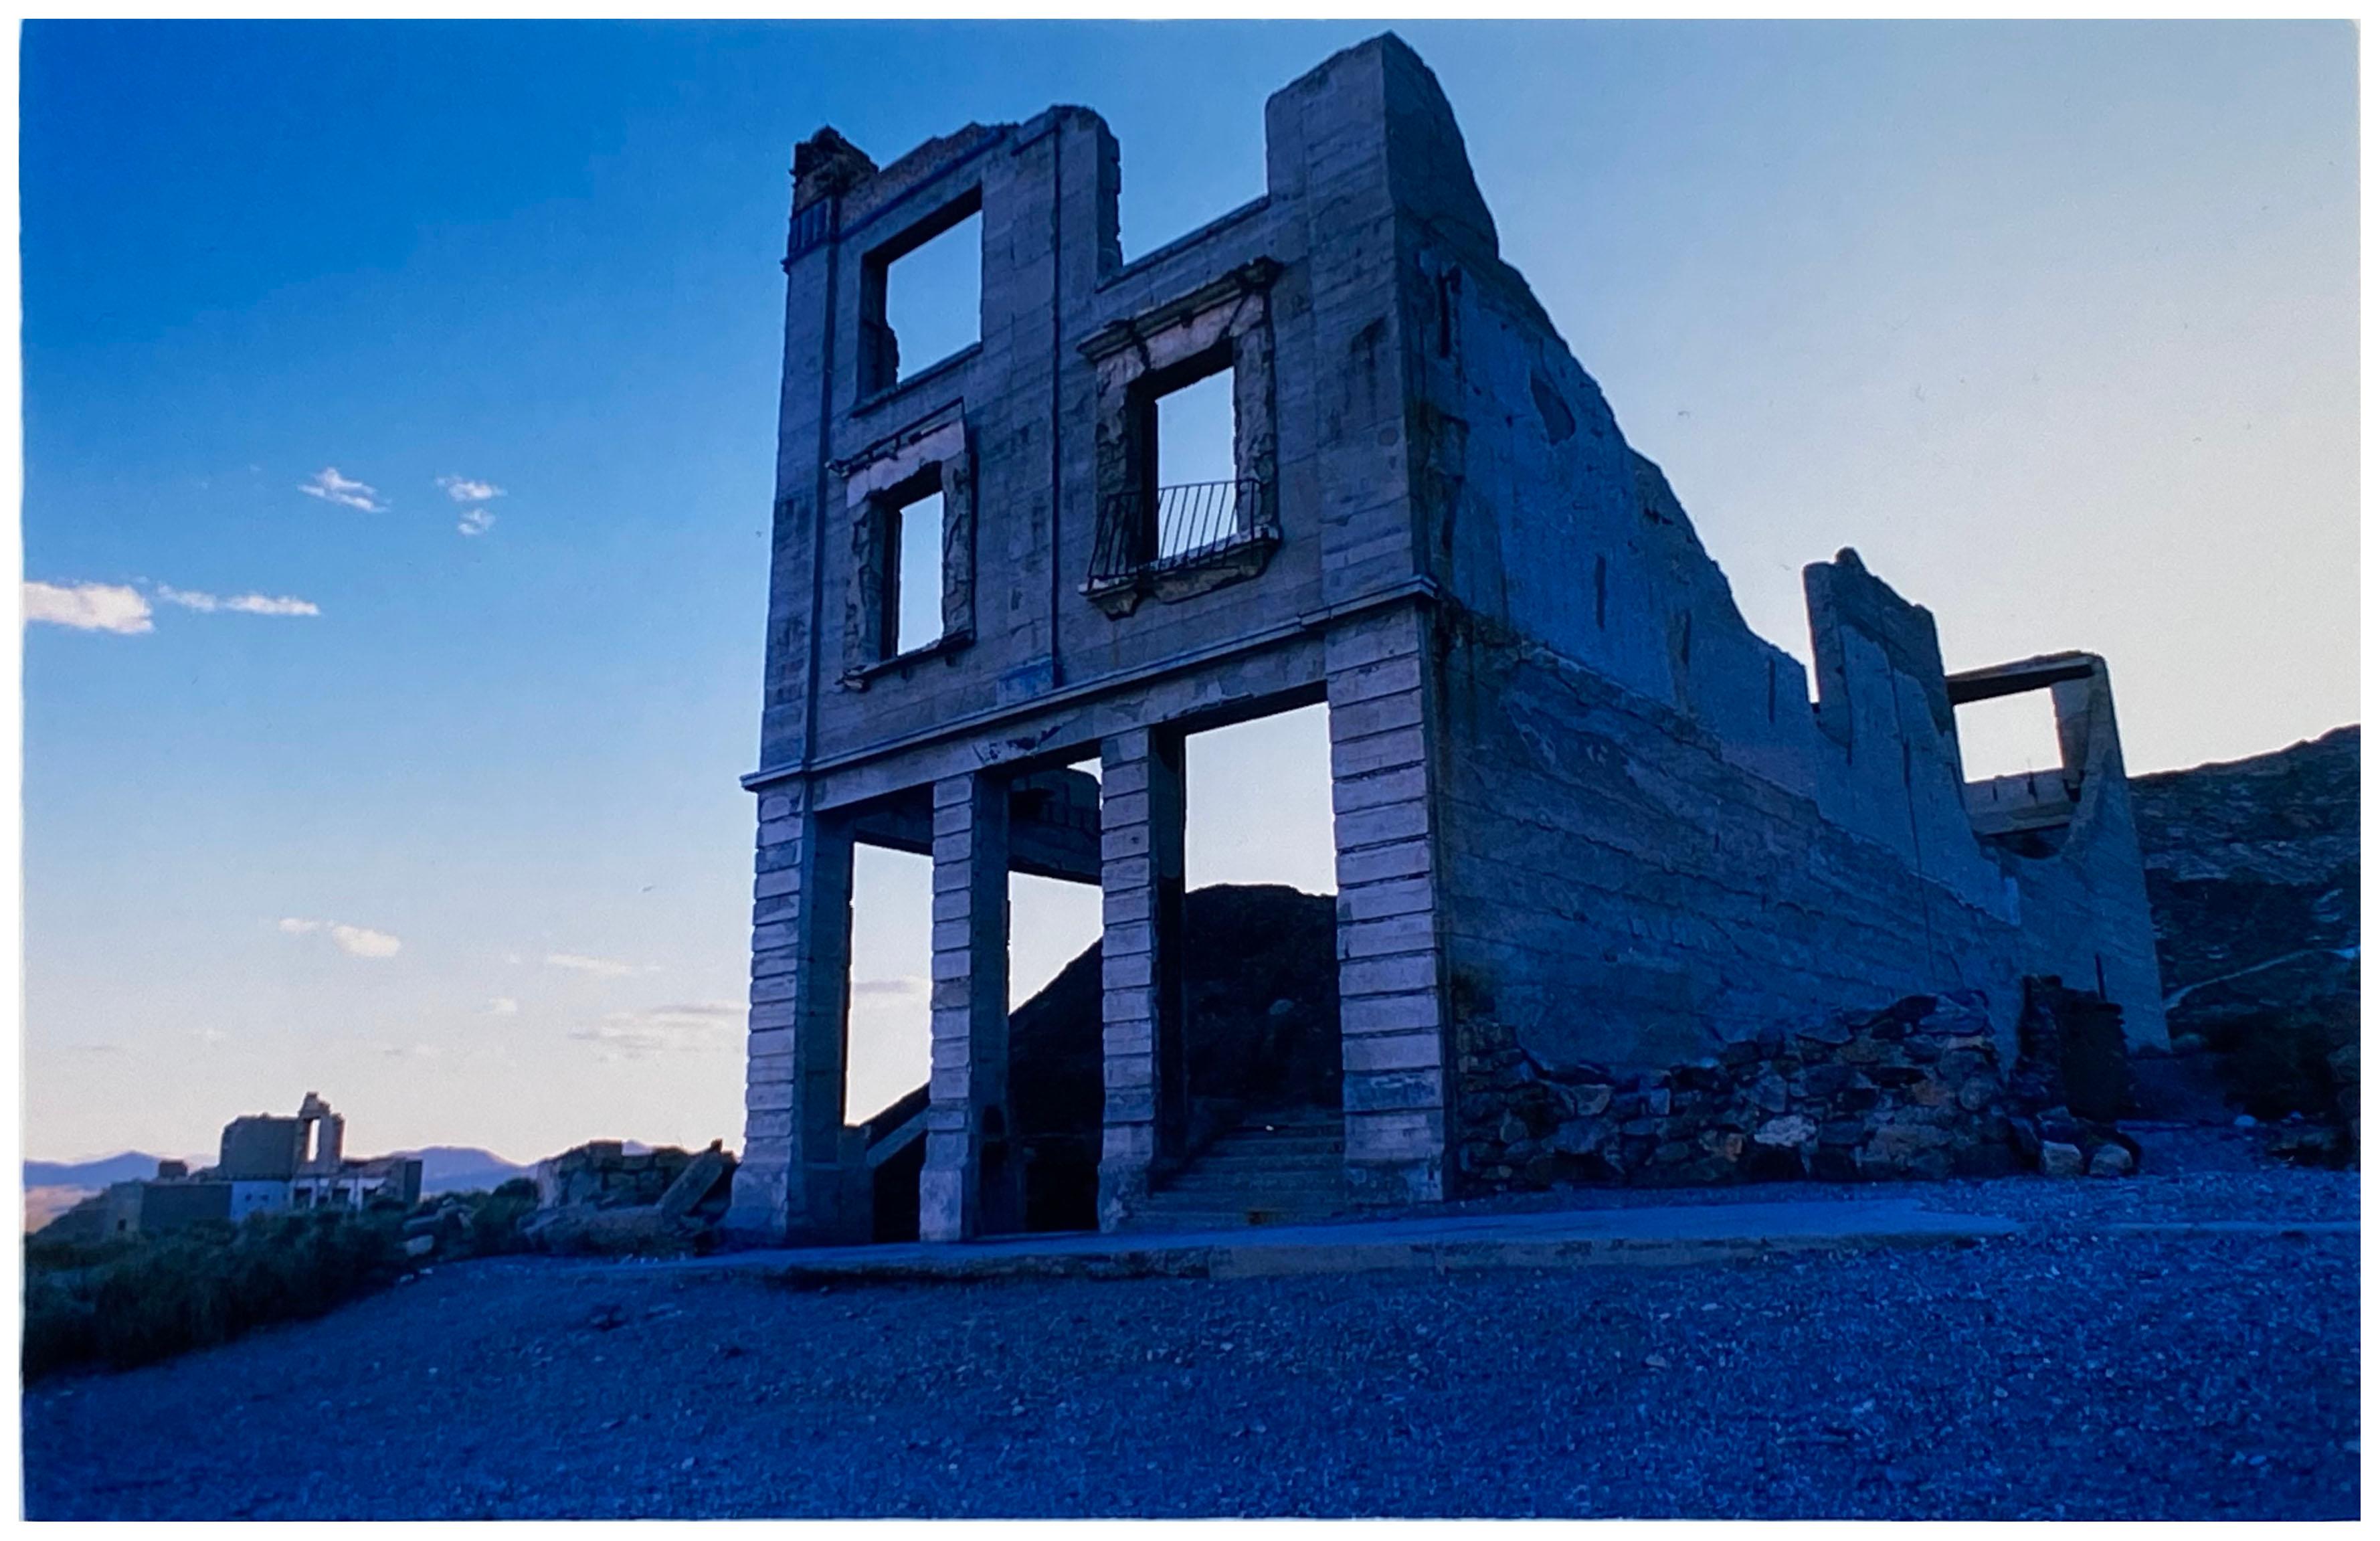 Richard Heeps Print - Cook Bank Building, Rhyolite, Nevada - American Architecture Color Photography